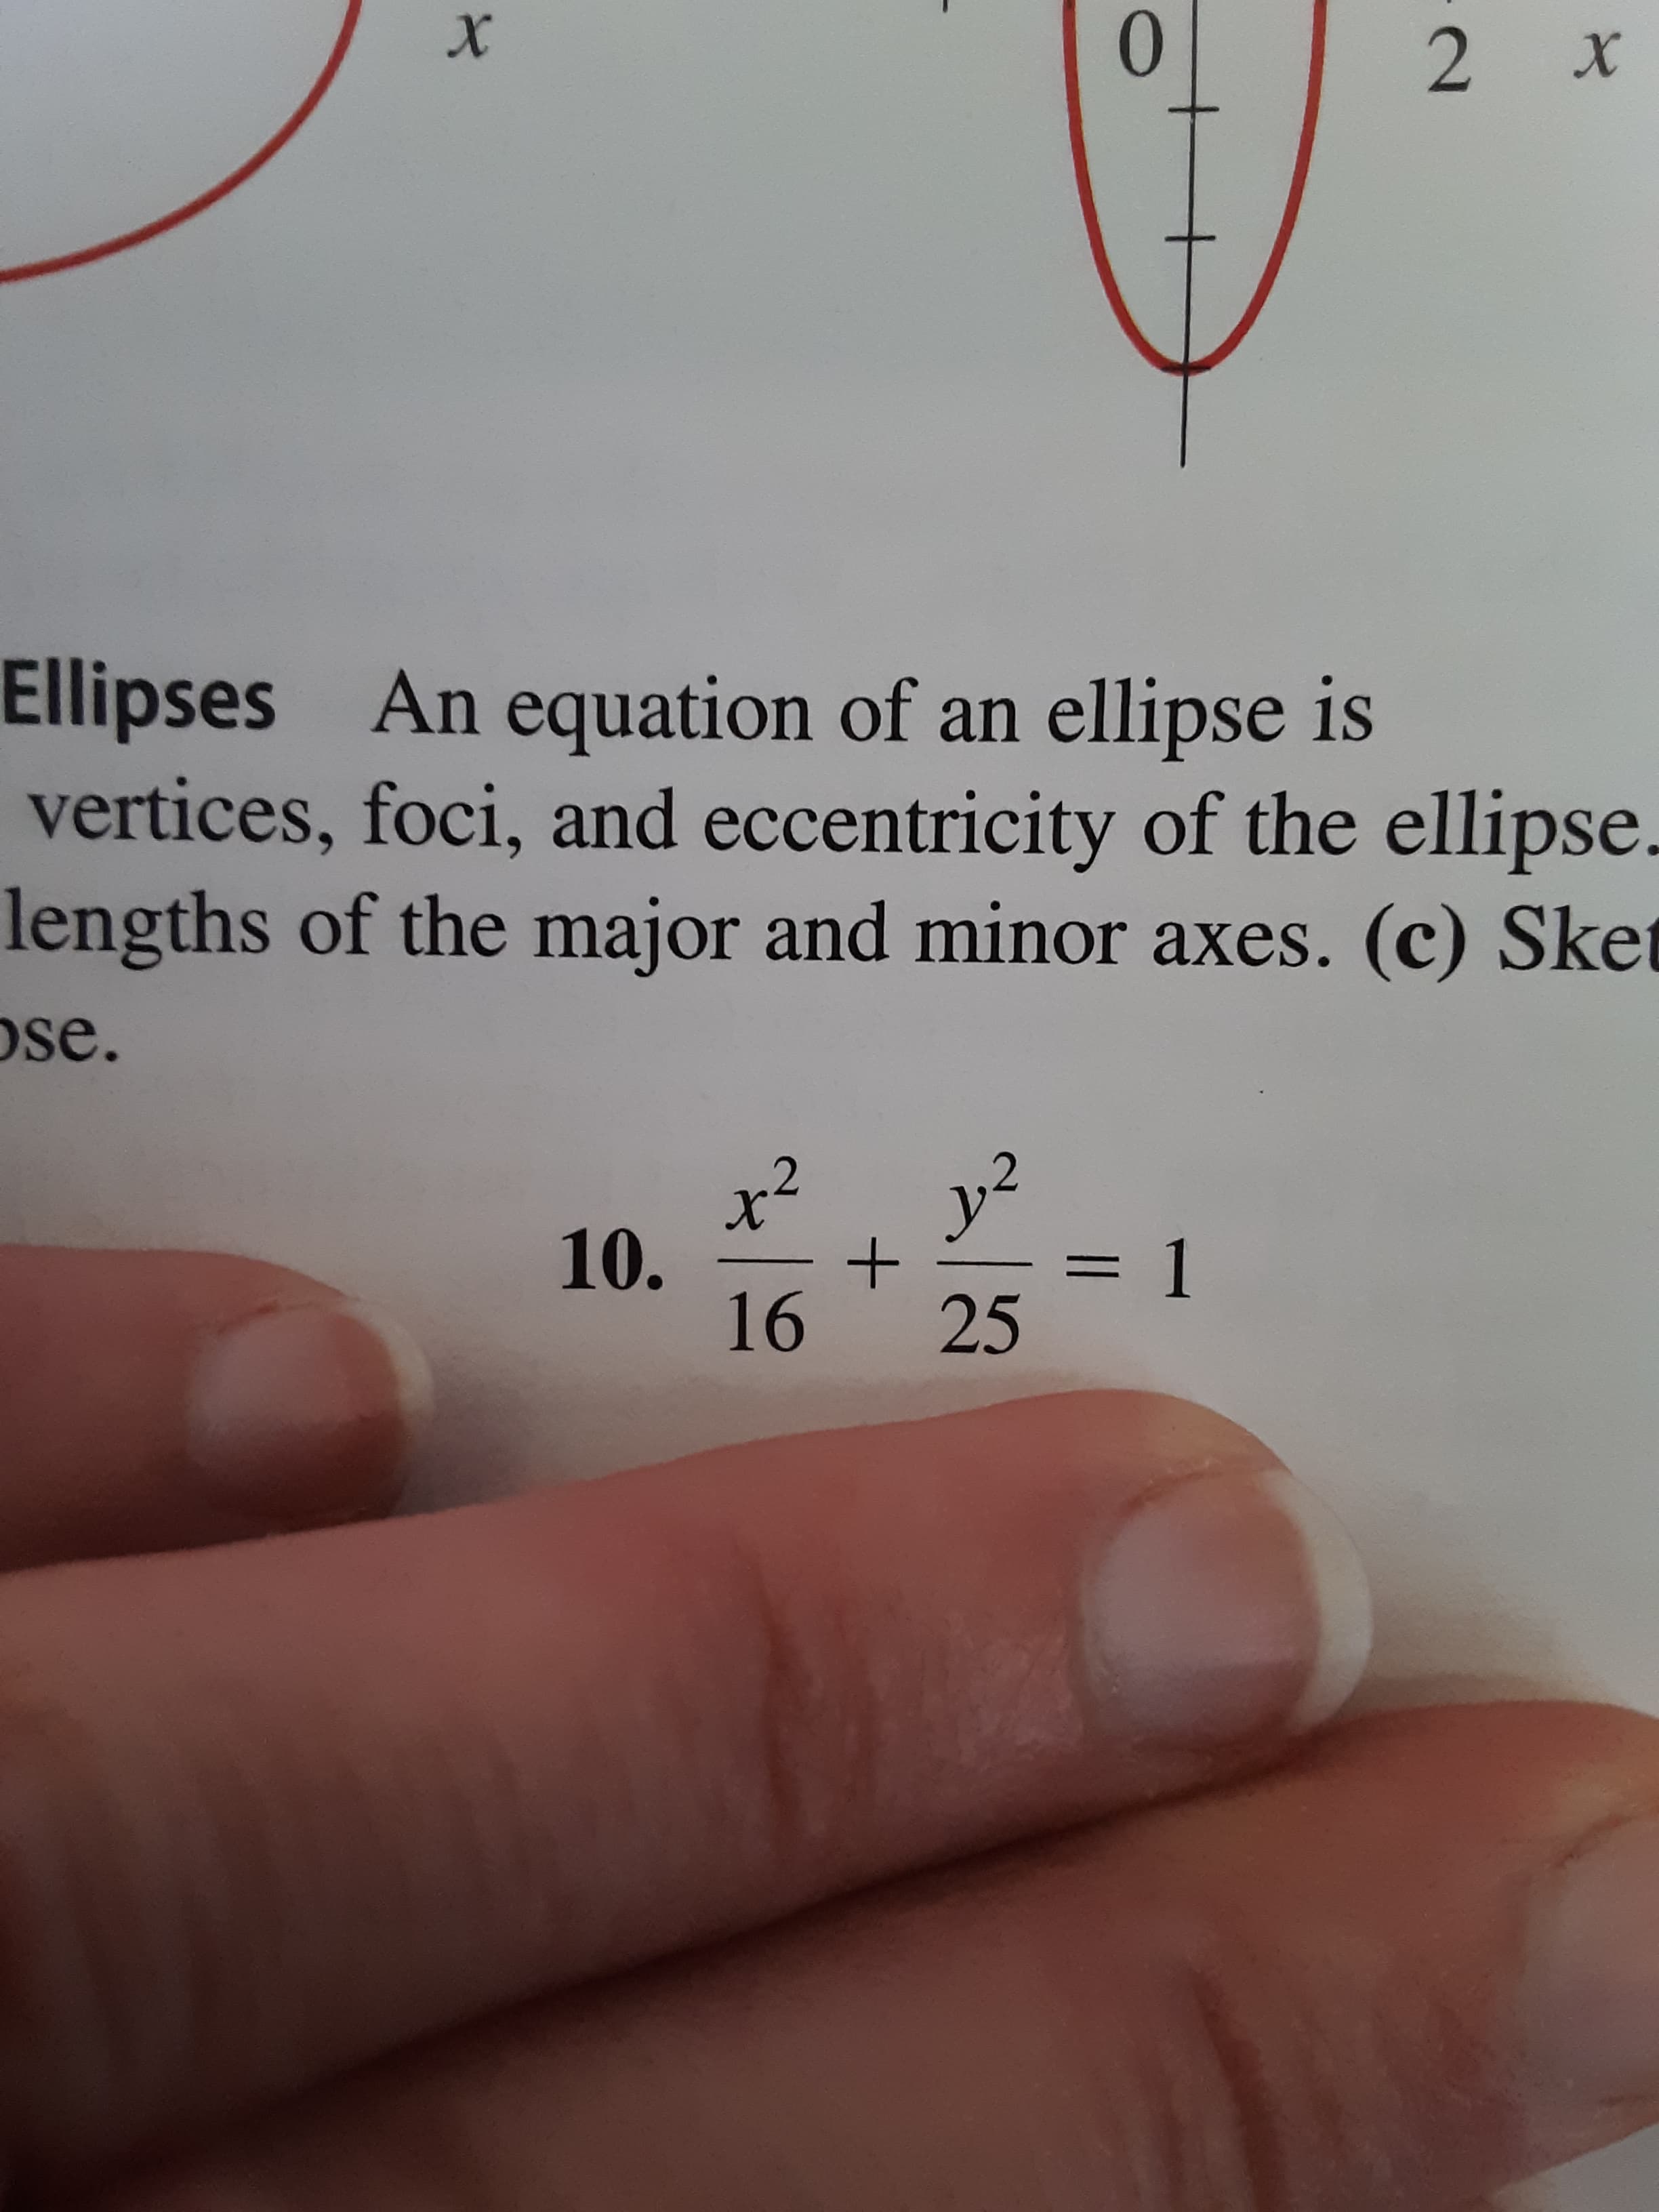 0
X
2
X
Ellipses An equation of an ellipse is
vertices, foci, and eccentricity of the ellipse.
lengths of the major and minor axes. (c) Sket
ose.
y2
10.
16
1
+
25
